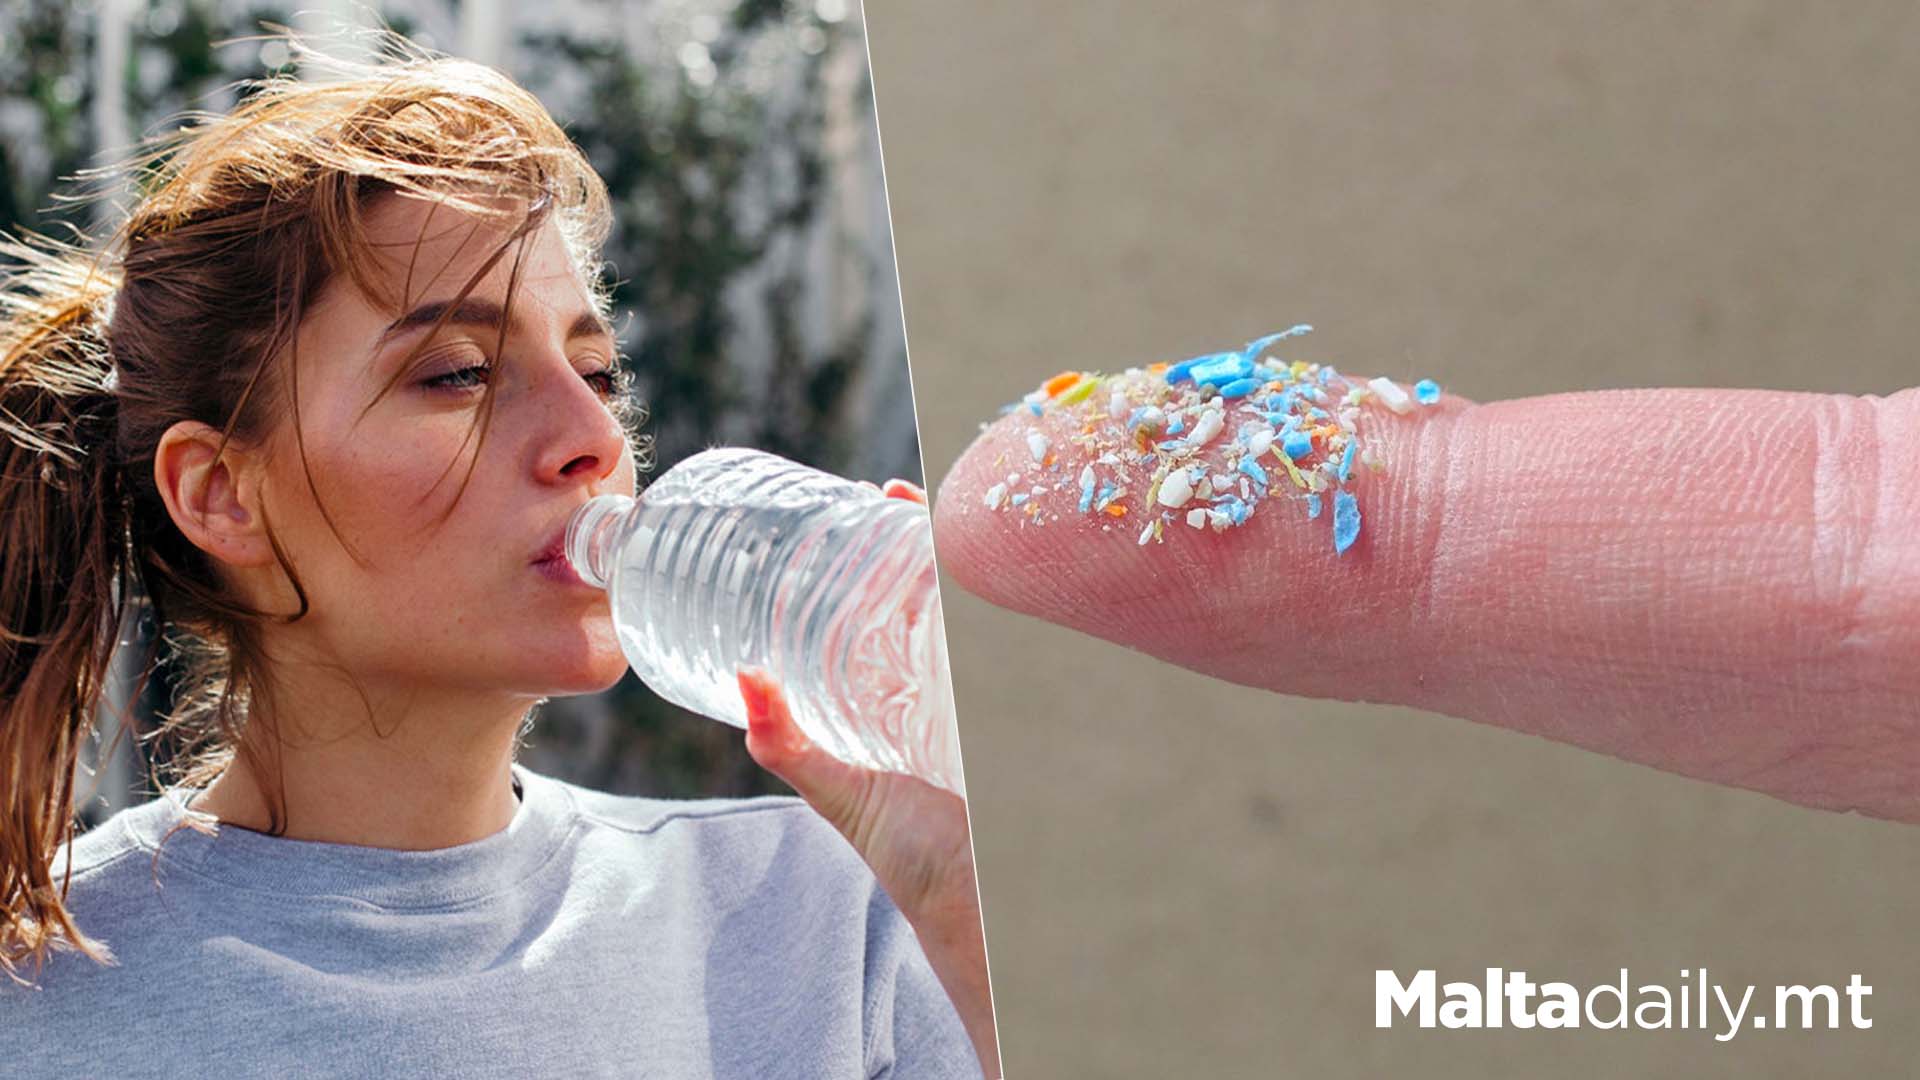 People Consuming Thousands Of Micro Plastics With Bottled Water